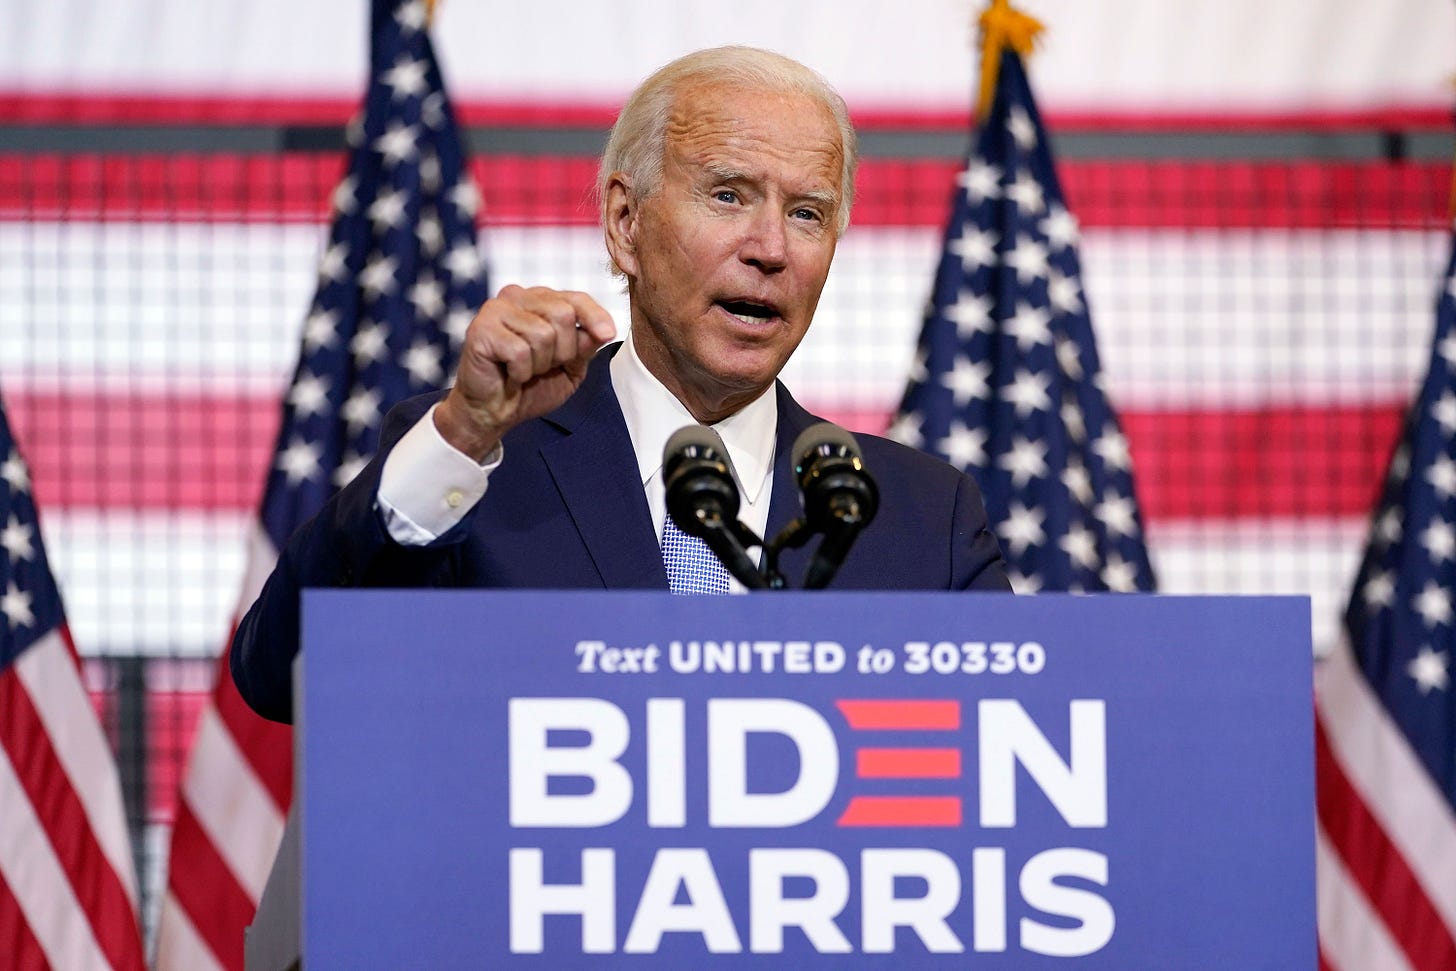 Biden: "Do I look to you like a radical socialist with a soft spot for  rioters?"